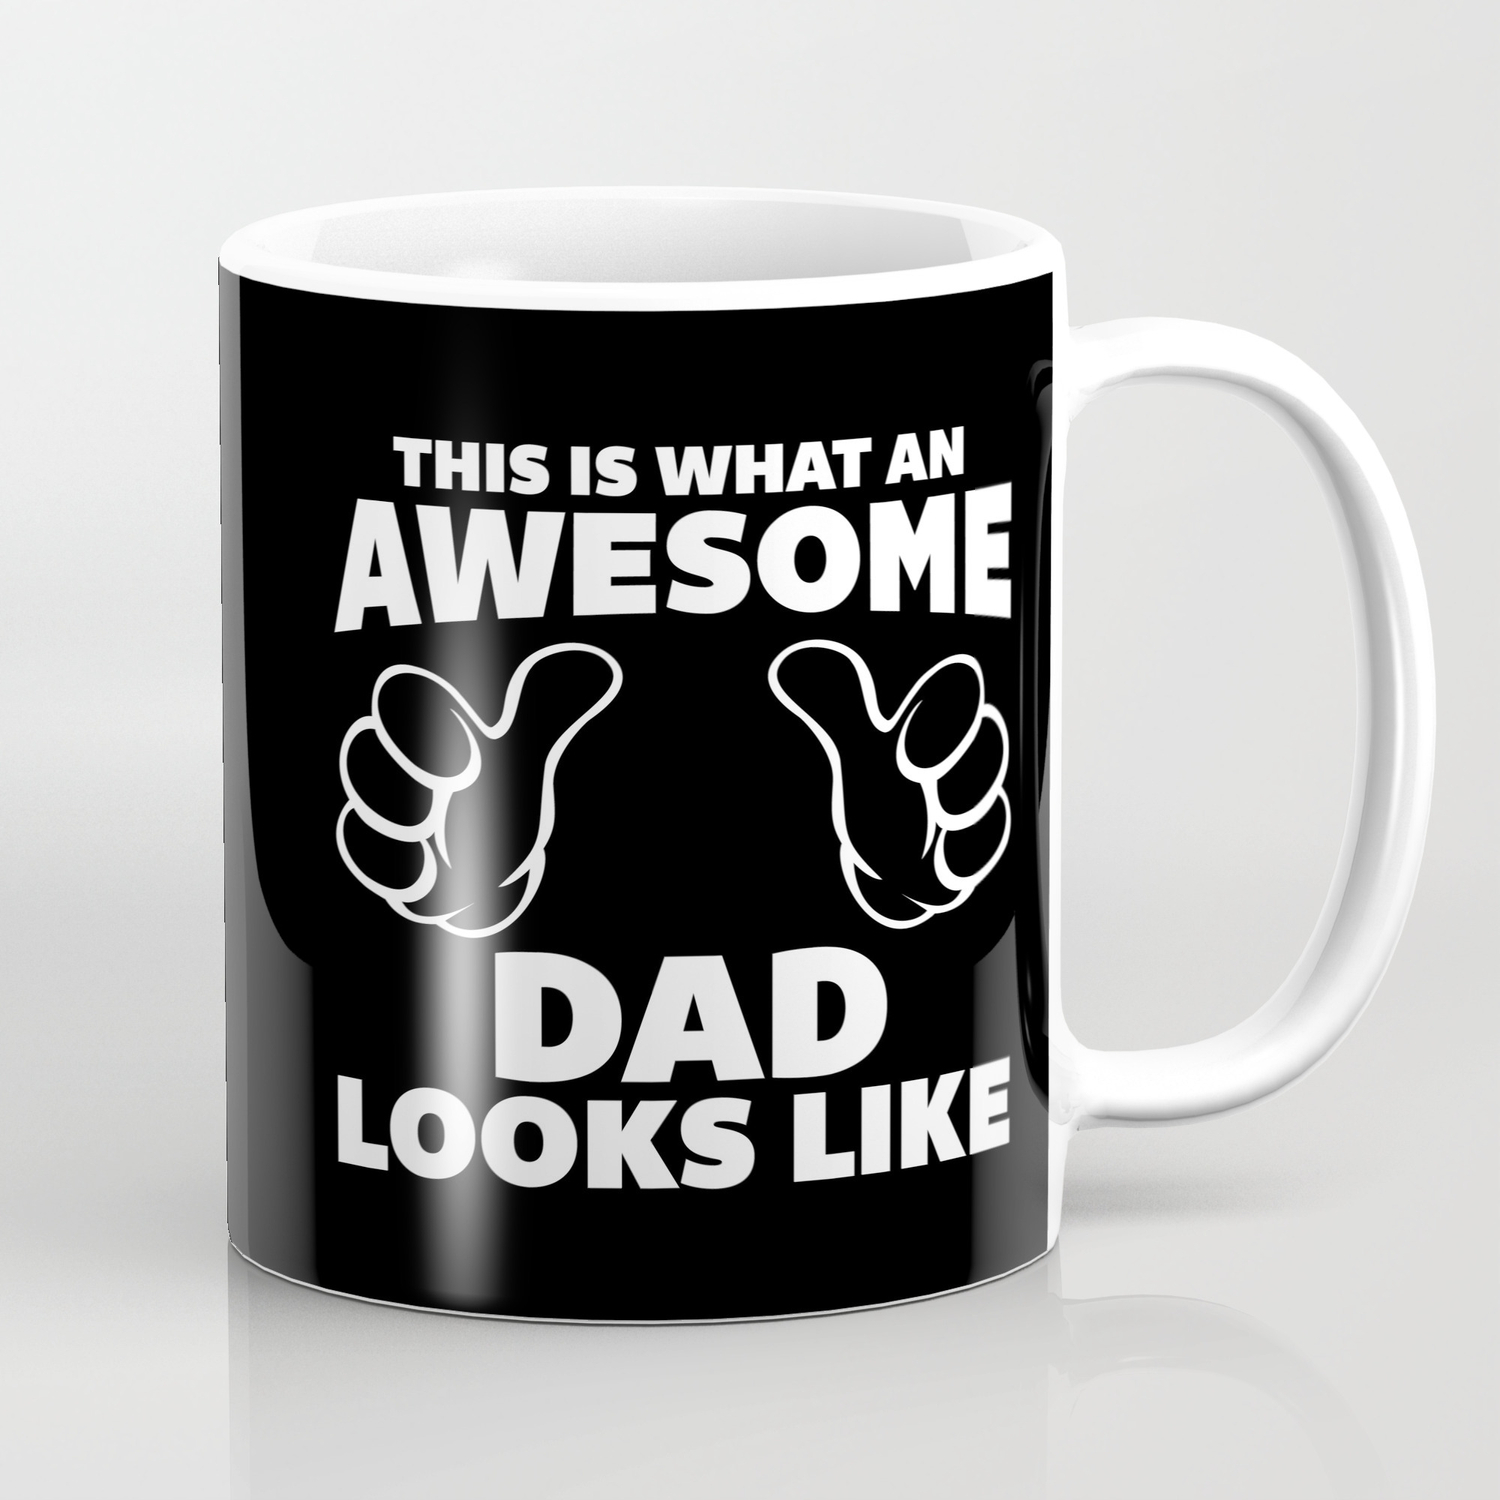 Awesome Dad Funny Quote Coffee Mug by #FamilyLife | Society6